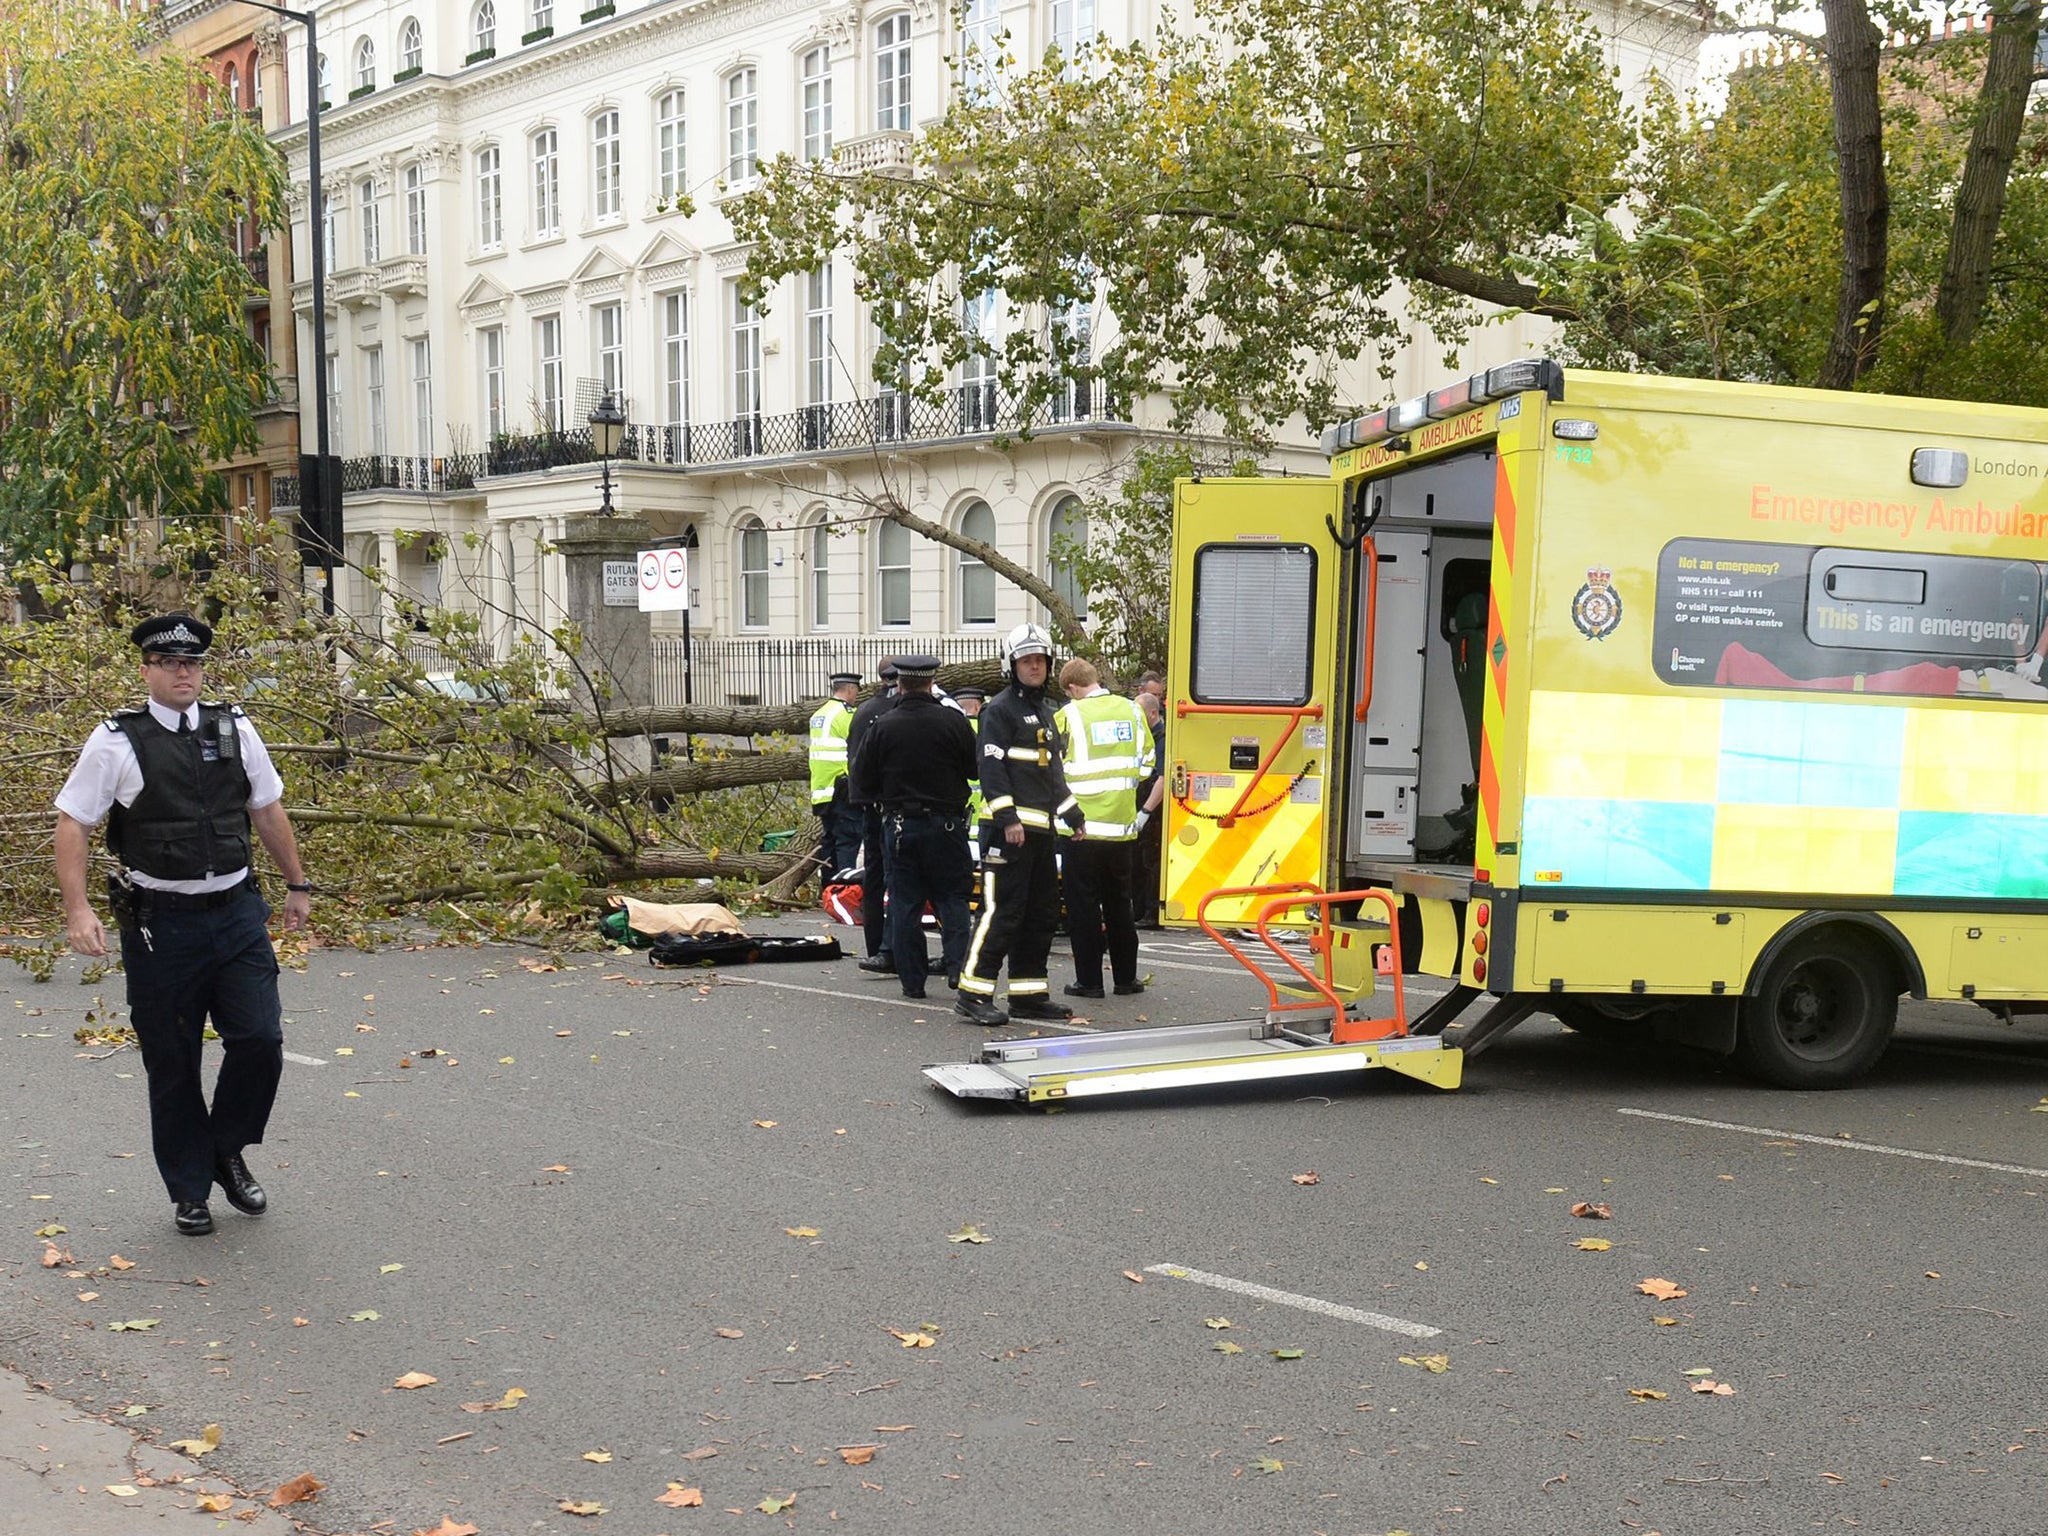 Police and London Ambulance services at the scene on Kensington Road, Kensington, west London where a woman has died after a tree fell into the street during high winds caused by the remnants of Hurricane Gonzalo